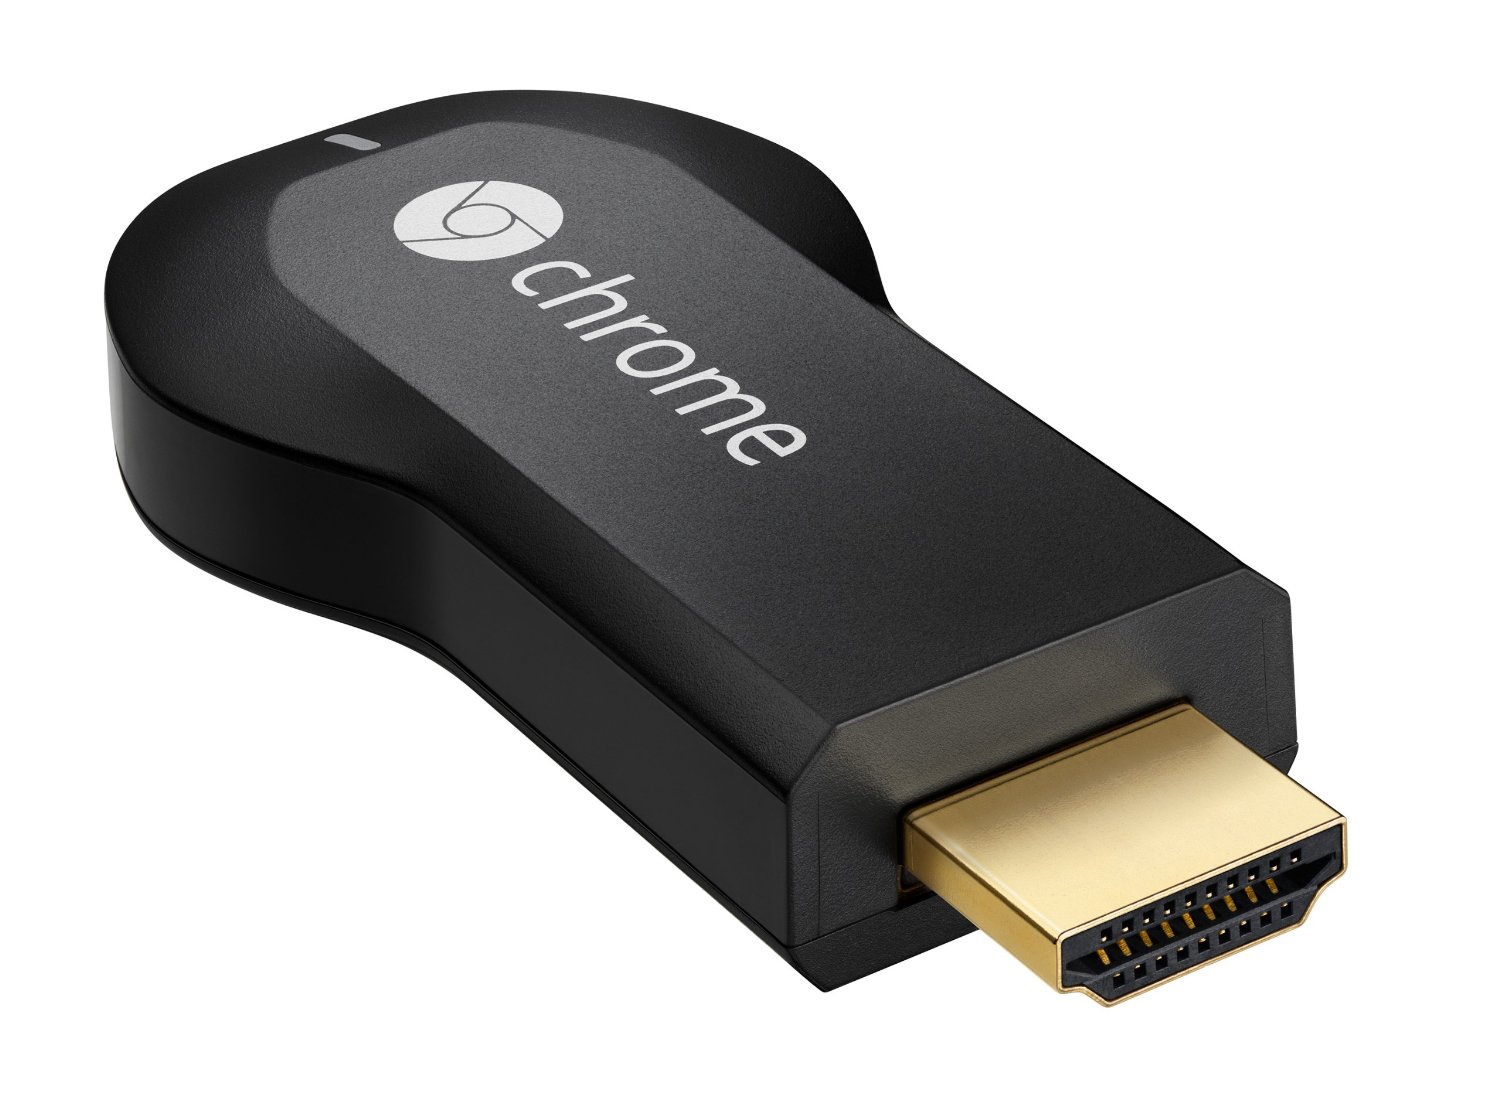 Big Sale! Roku 3 $74.99 – $20 Google Play Credit when you buy a Chromecast for $32.61!